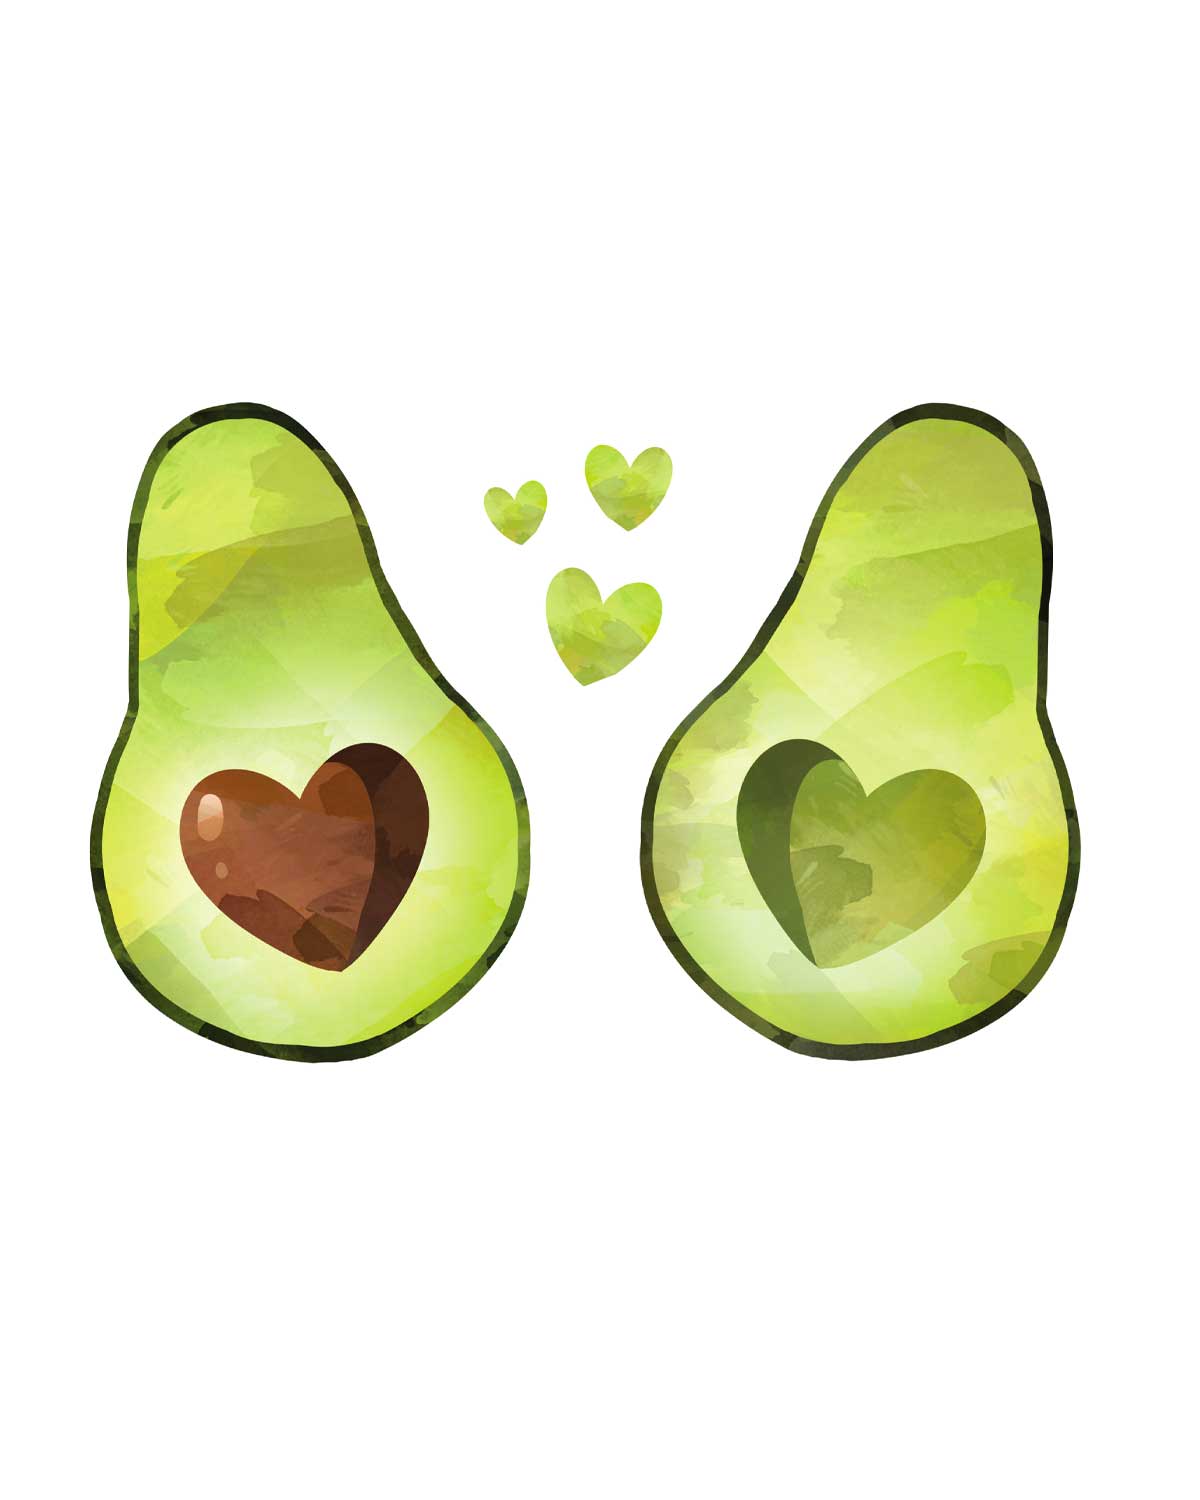 An illustration of a halved avocado with the pit in a heart shape for the writing 'I Tried Blanching Avocados. Here's What Happened.'